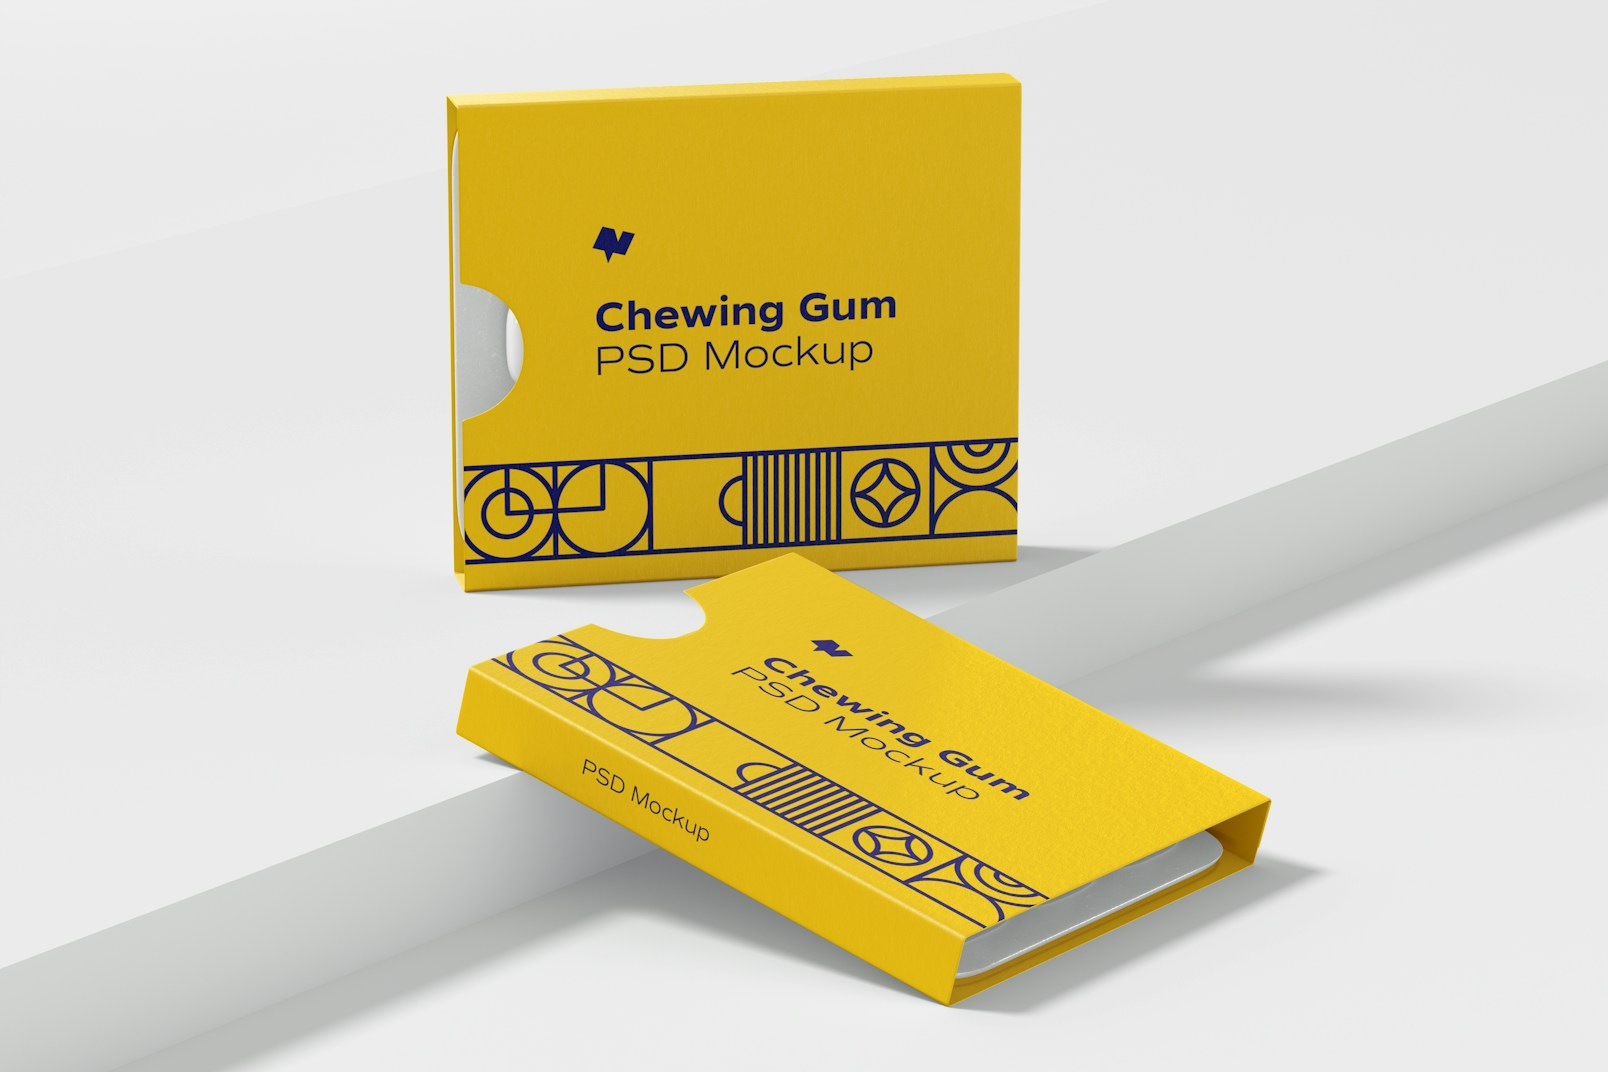 Chewing Gum Packaging Mockup, Dropped